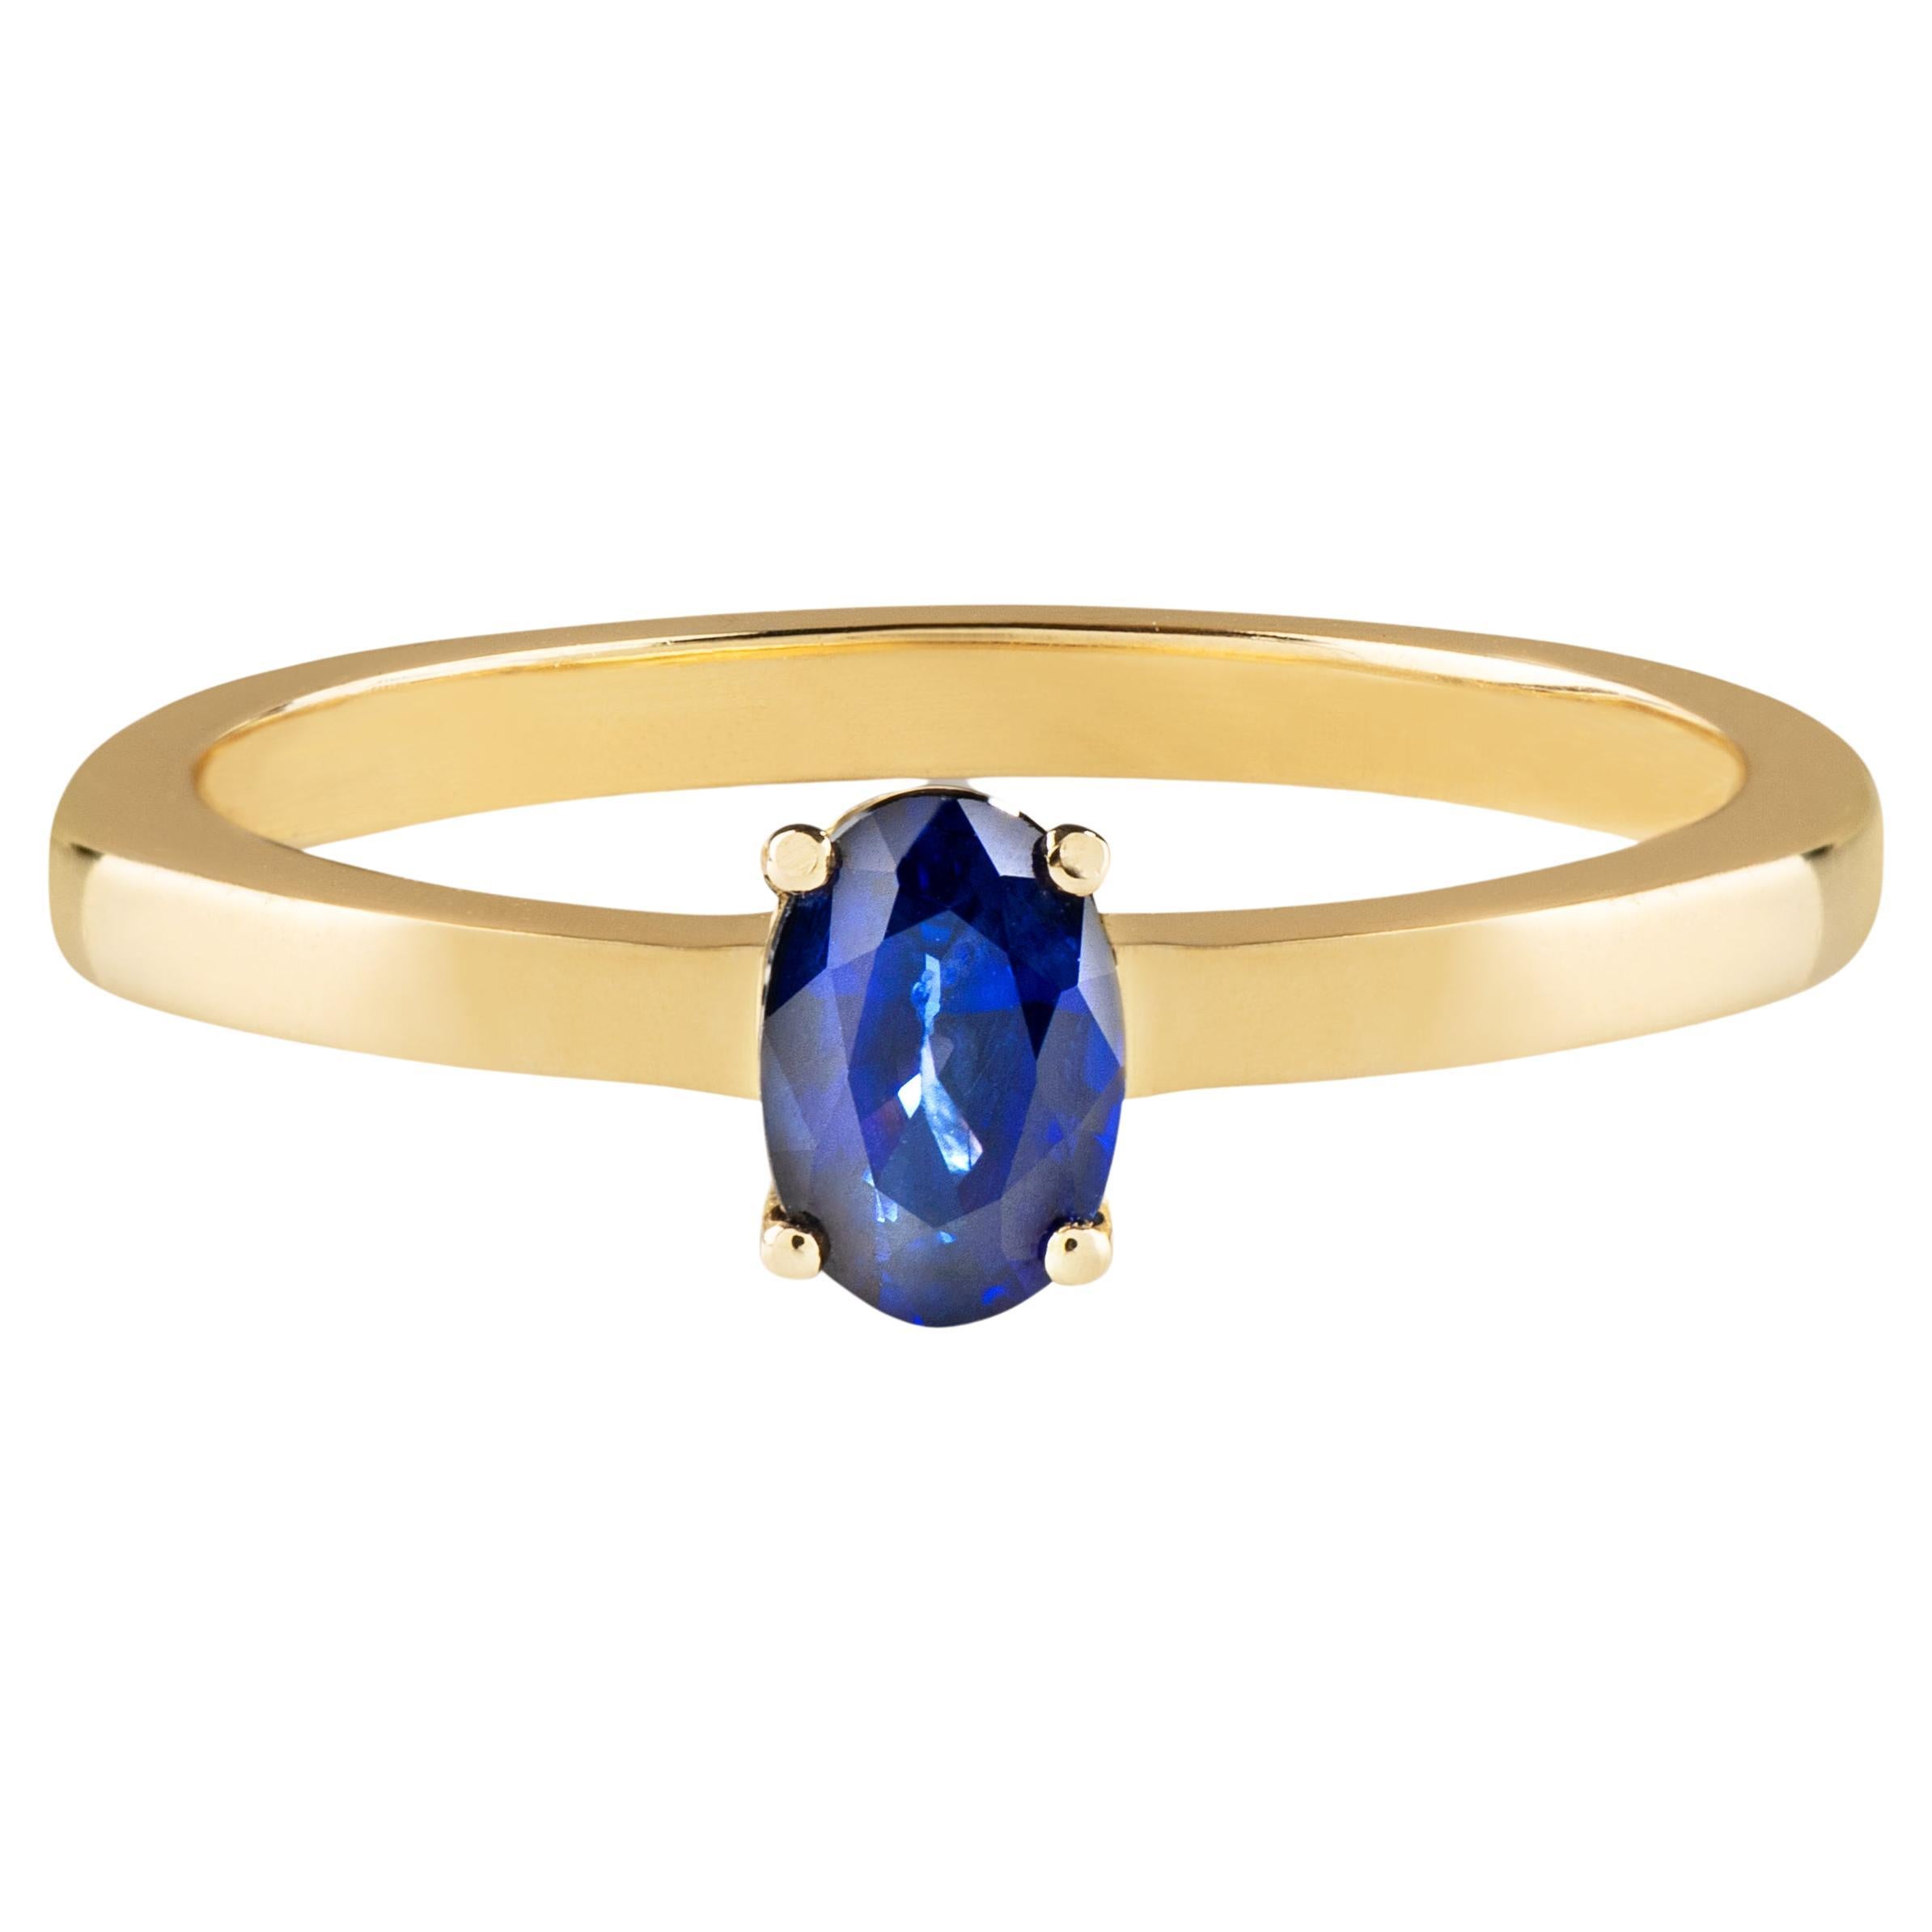 Missian Jewelery ring with 0.58 carat sapphires and 18 karat gold For Sale